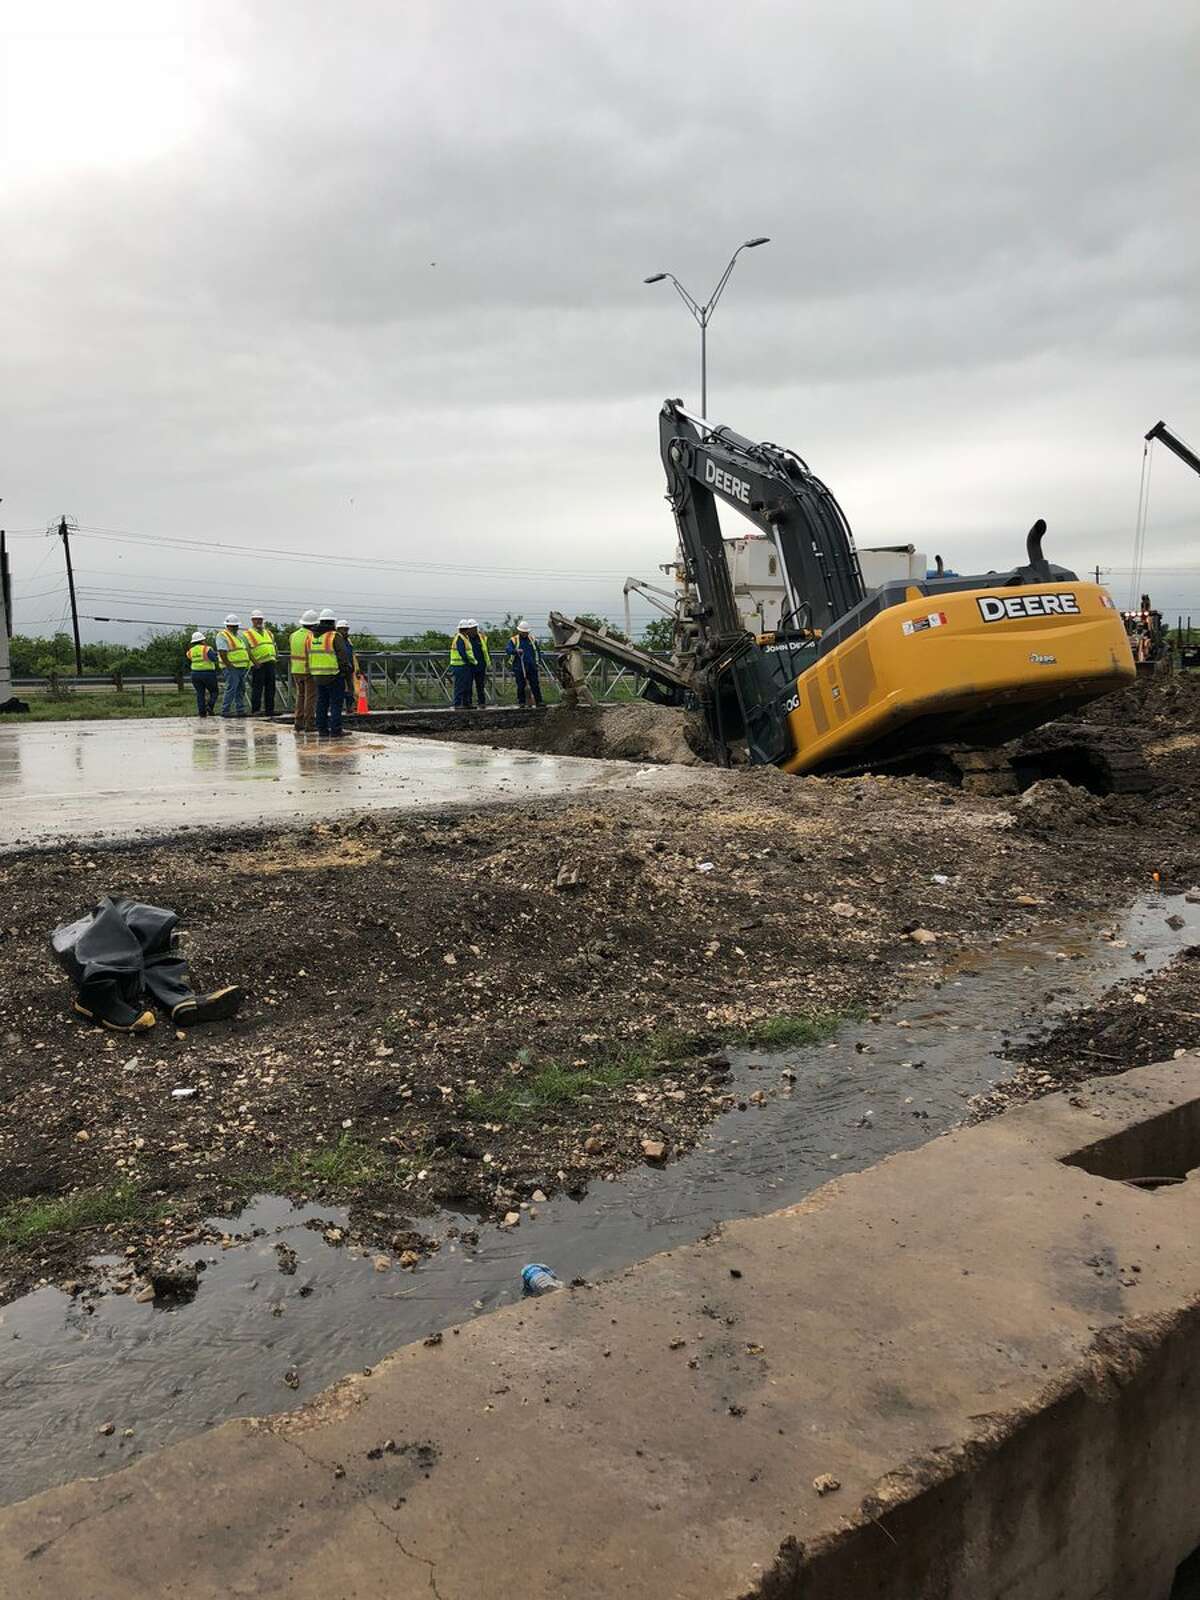 US 90 WB CLOSURE UPDATE: Progress being made on @MySAWS sewer line collapse but rain is slowing things down. The WB frontage road is partially open but mainlanes will remain closed at Hunt Lane through evening rush hour. Here's a @MySAWS video update: